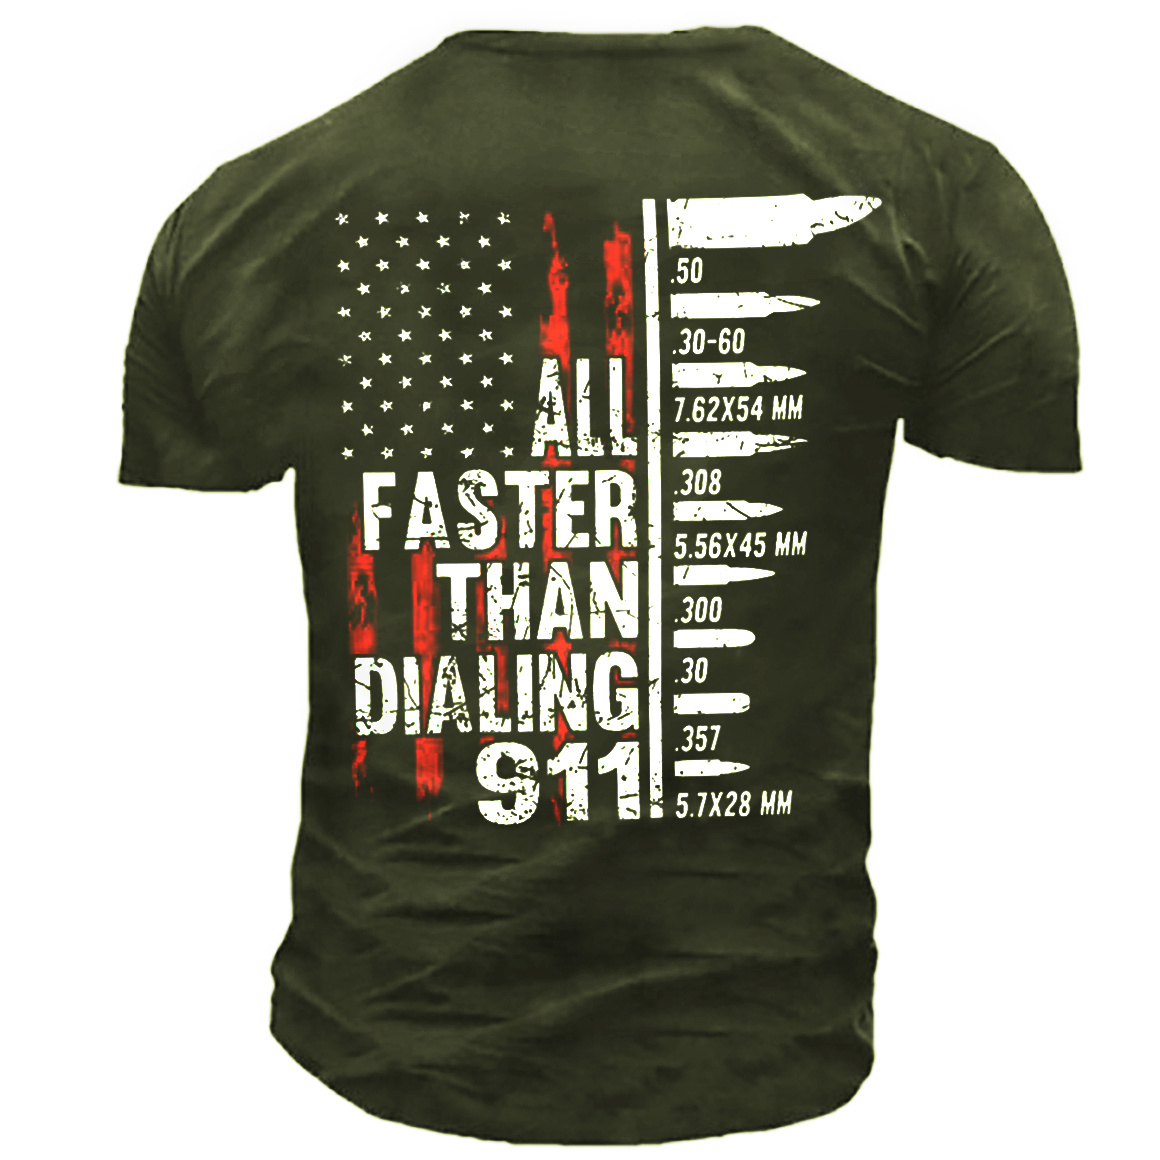 All Faster Than Dialing Chic 911 American Flag Gun Lover For Men Cotton Tee